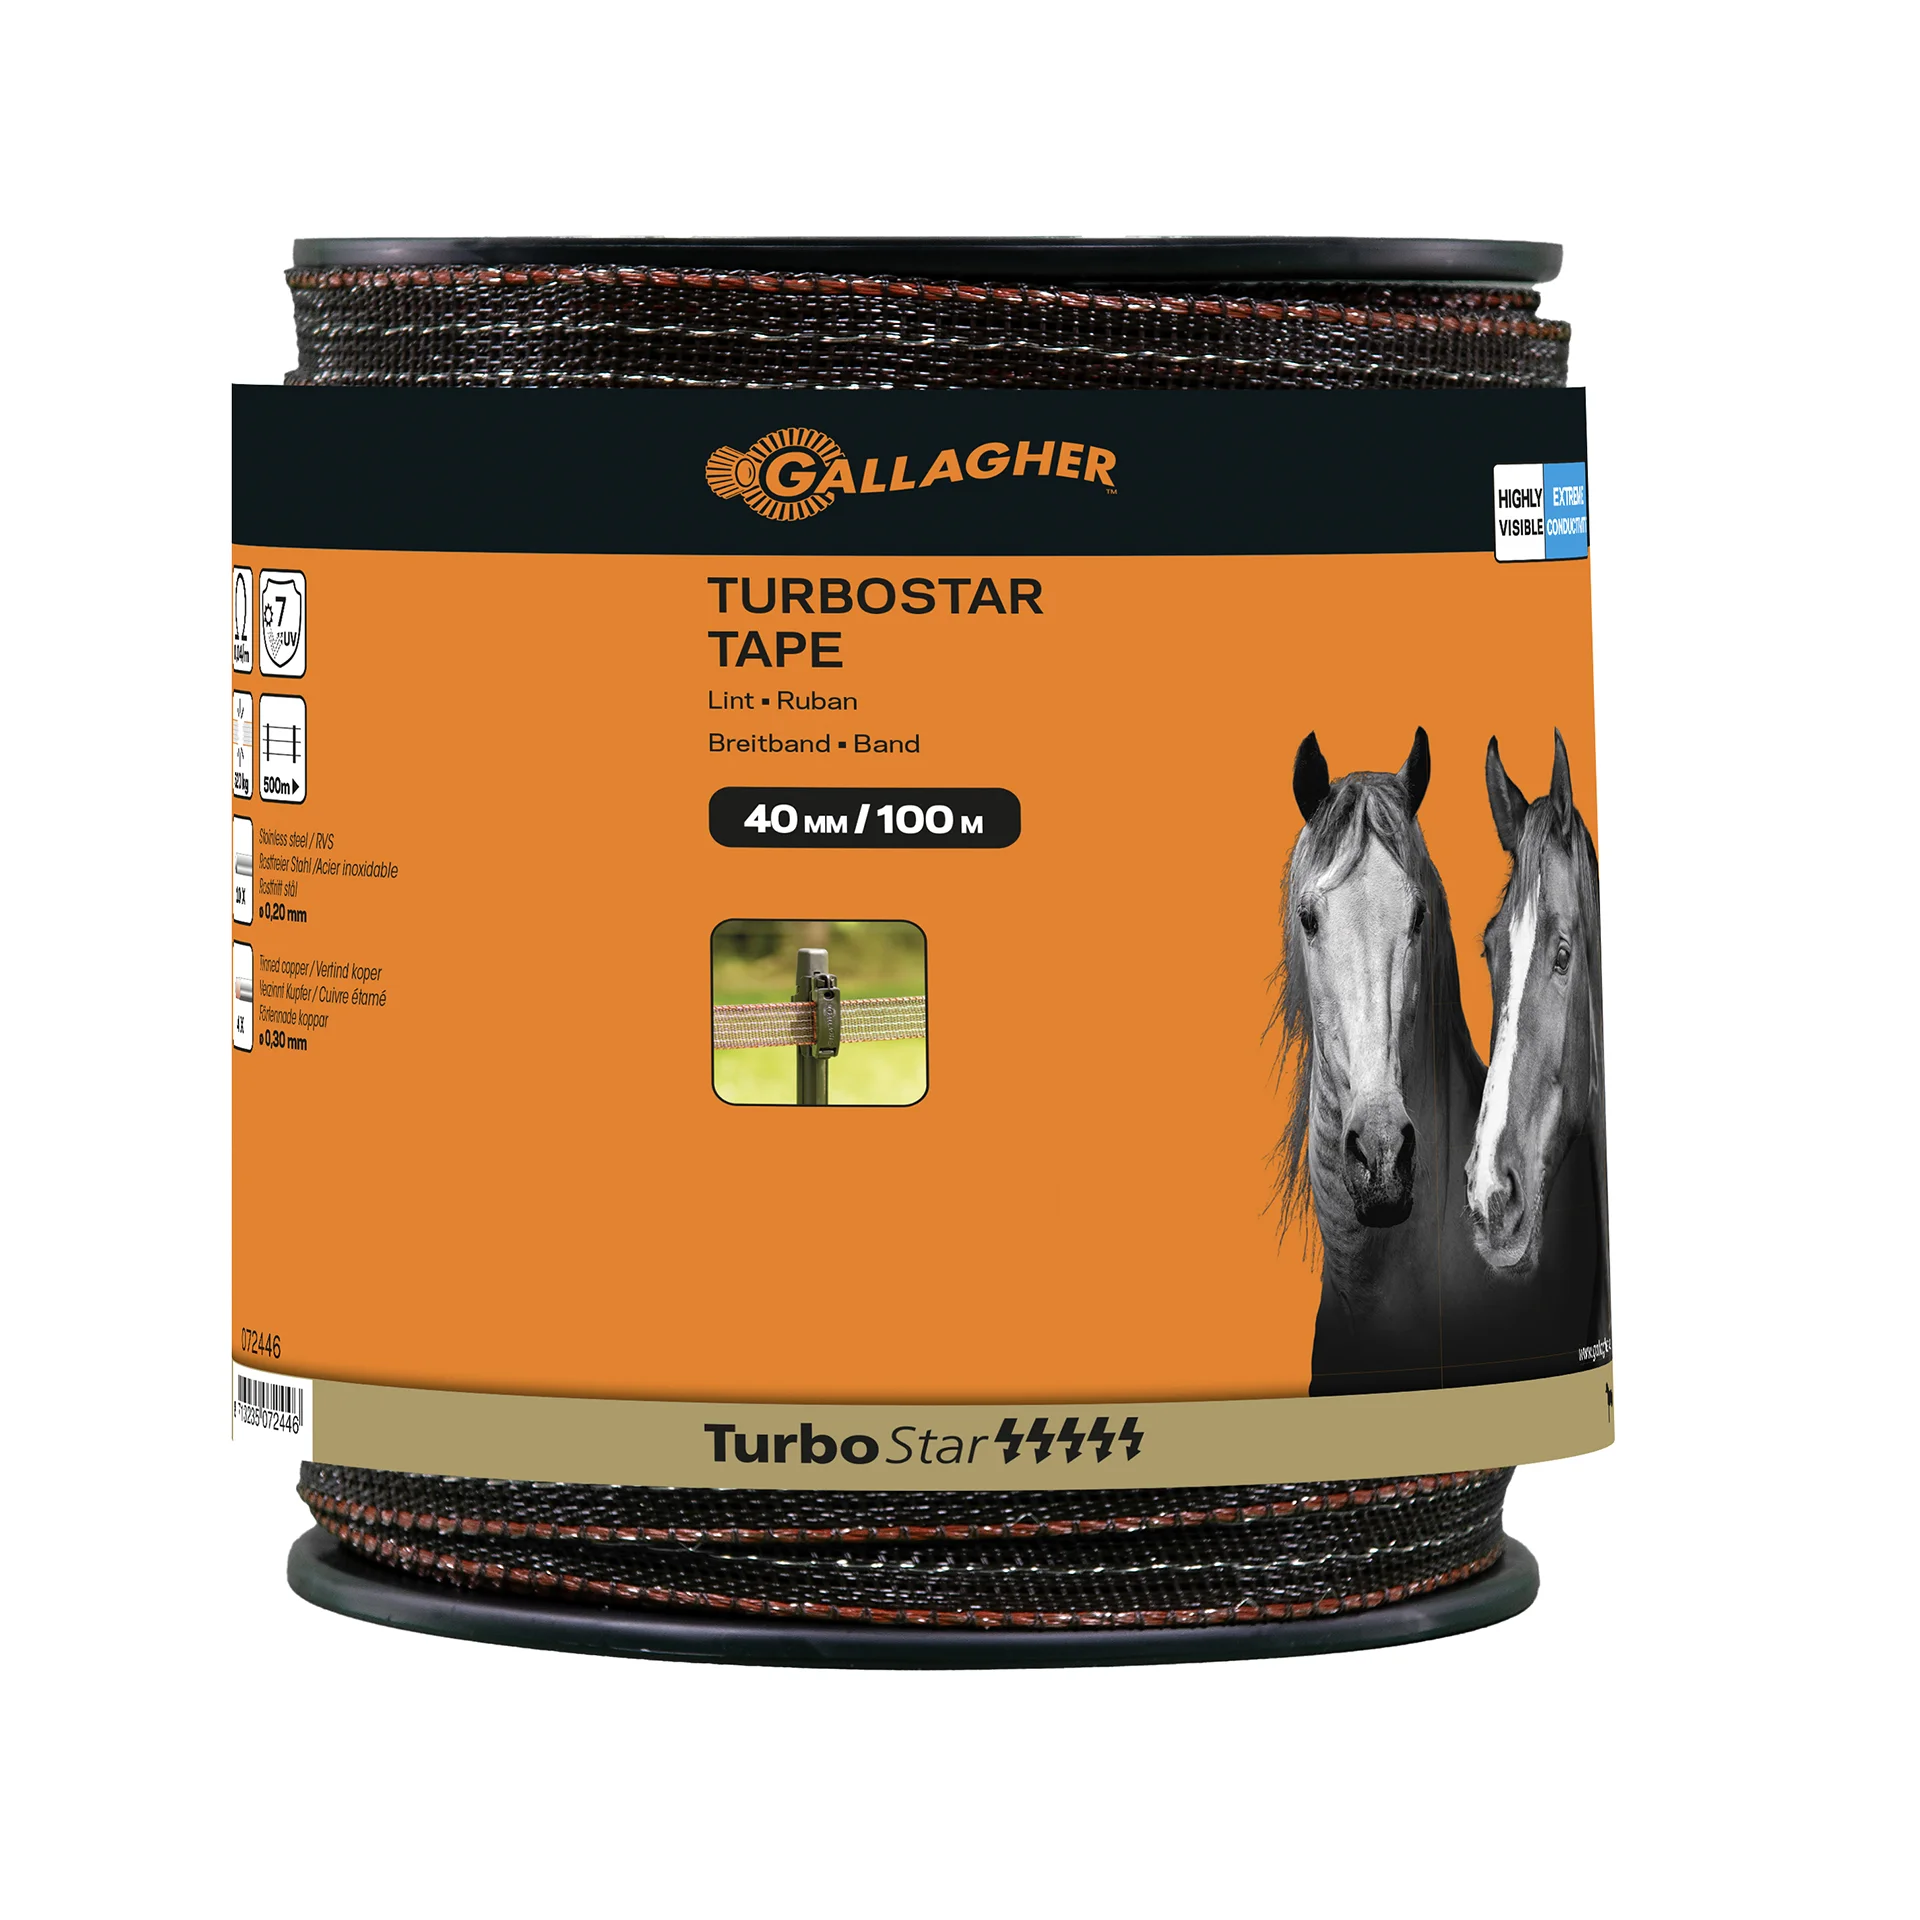 Gallagher electric fence tape TurboStar 40mm wide (100m) Terra